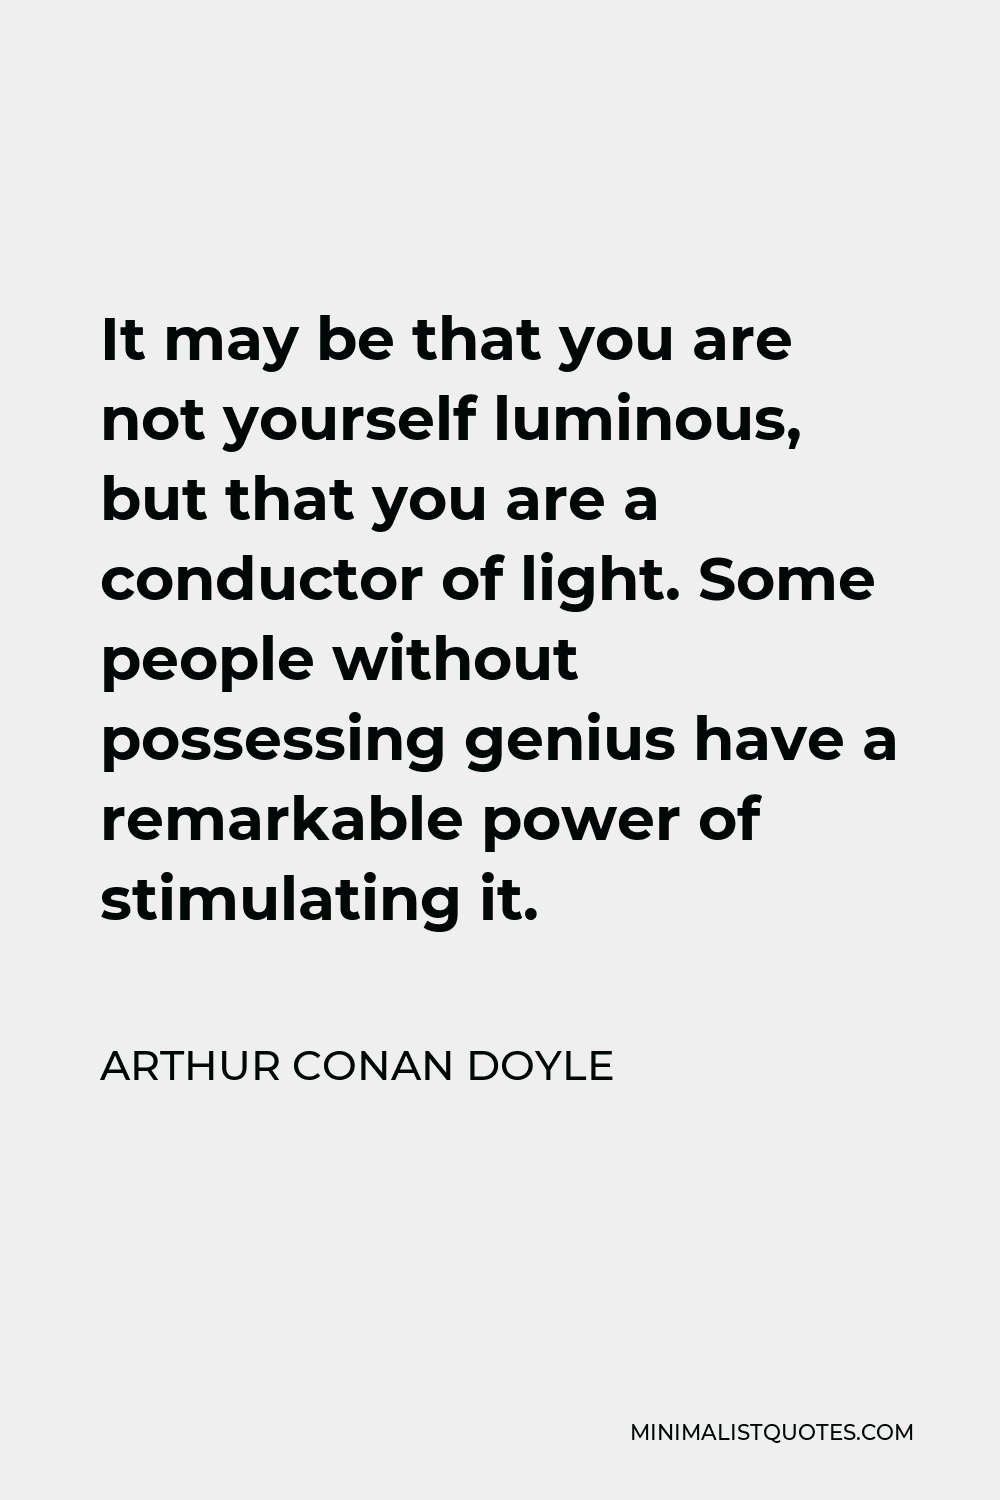 Arthur Conan Doyle Quote - It may be that you are not yourself luminous, but that you are a conductor of light. Some people without possessing genius have a remarkable power of stimulating it.